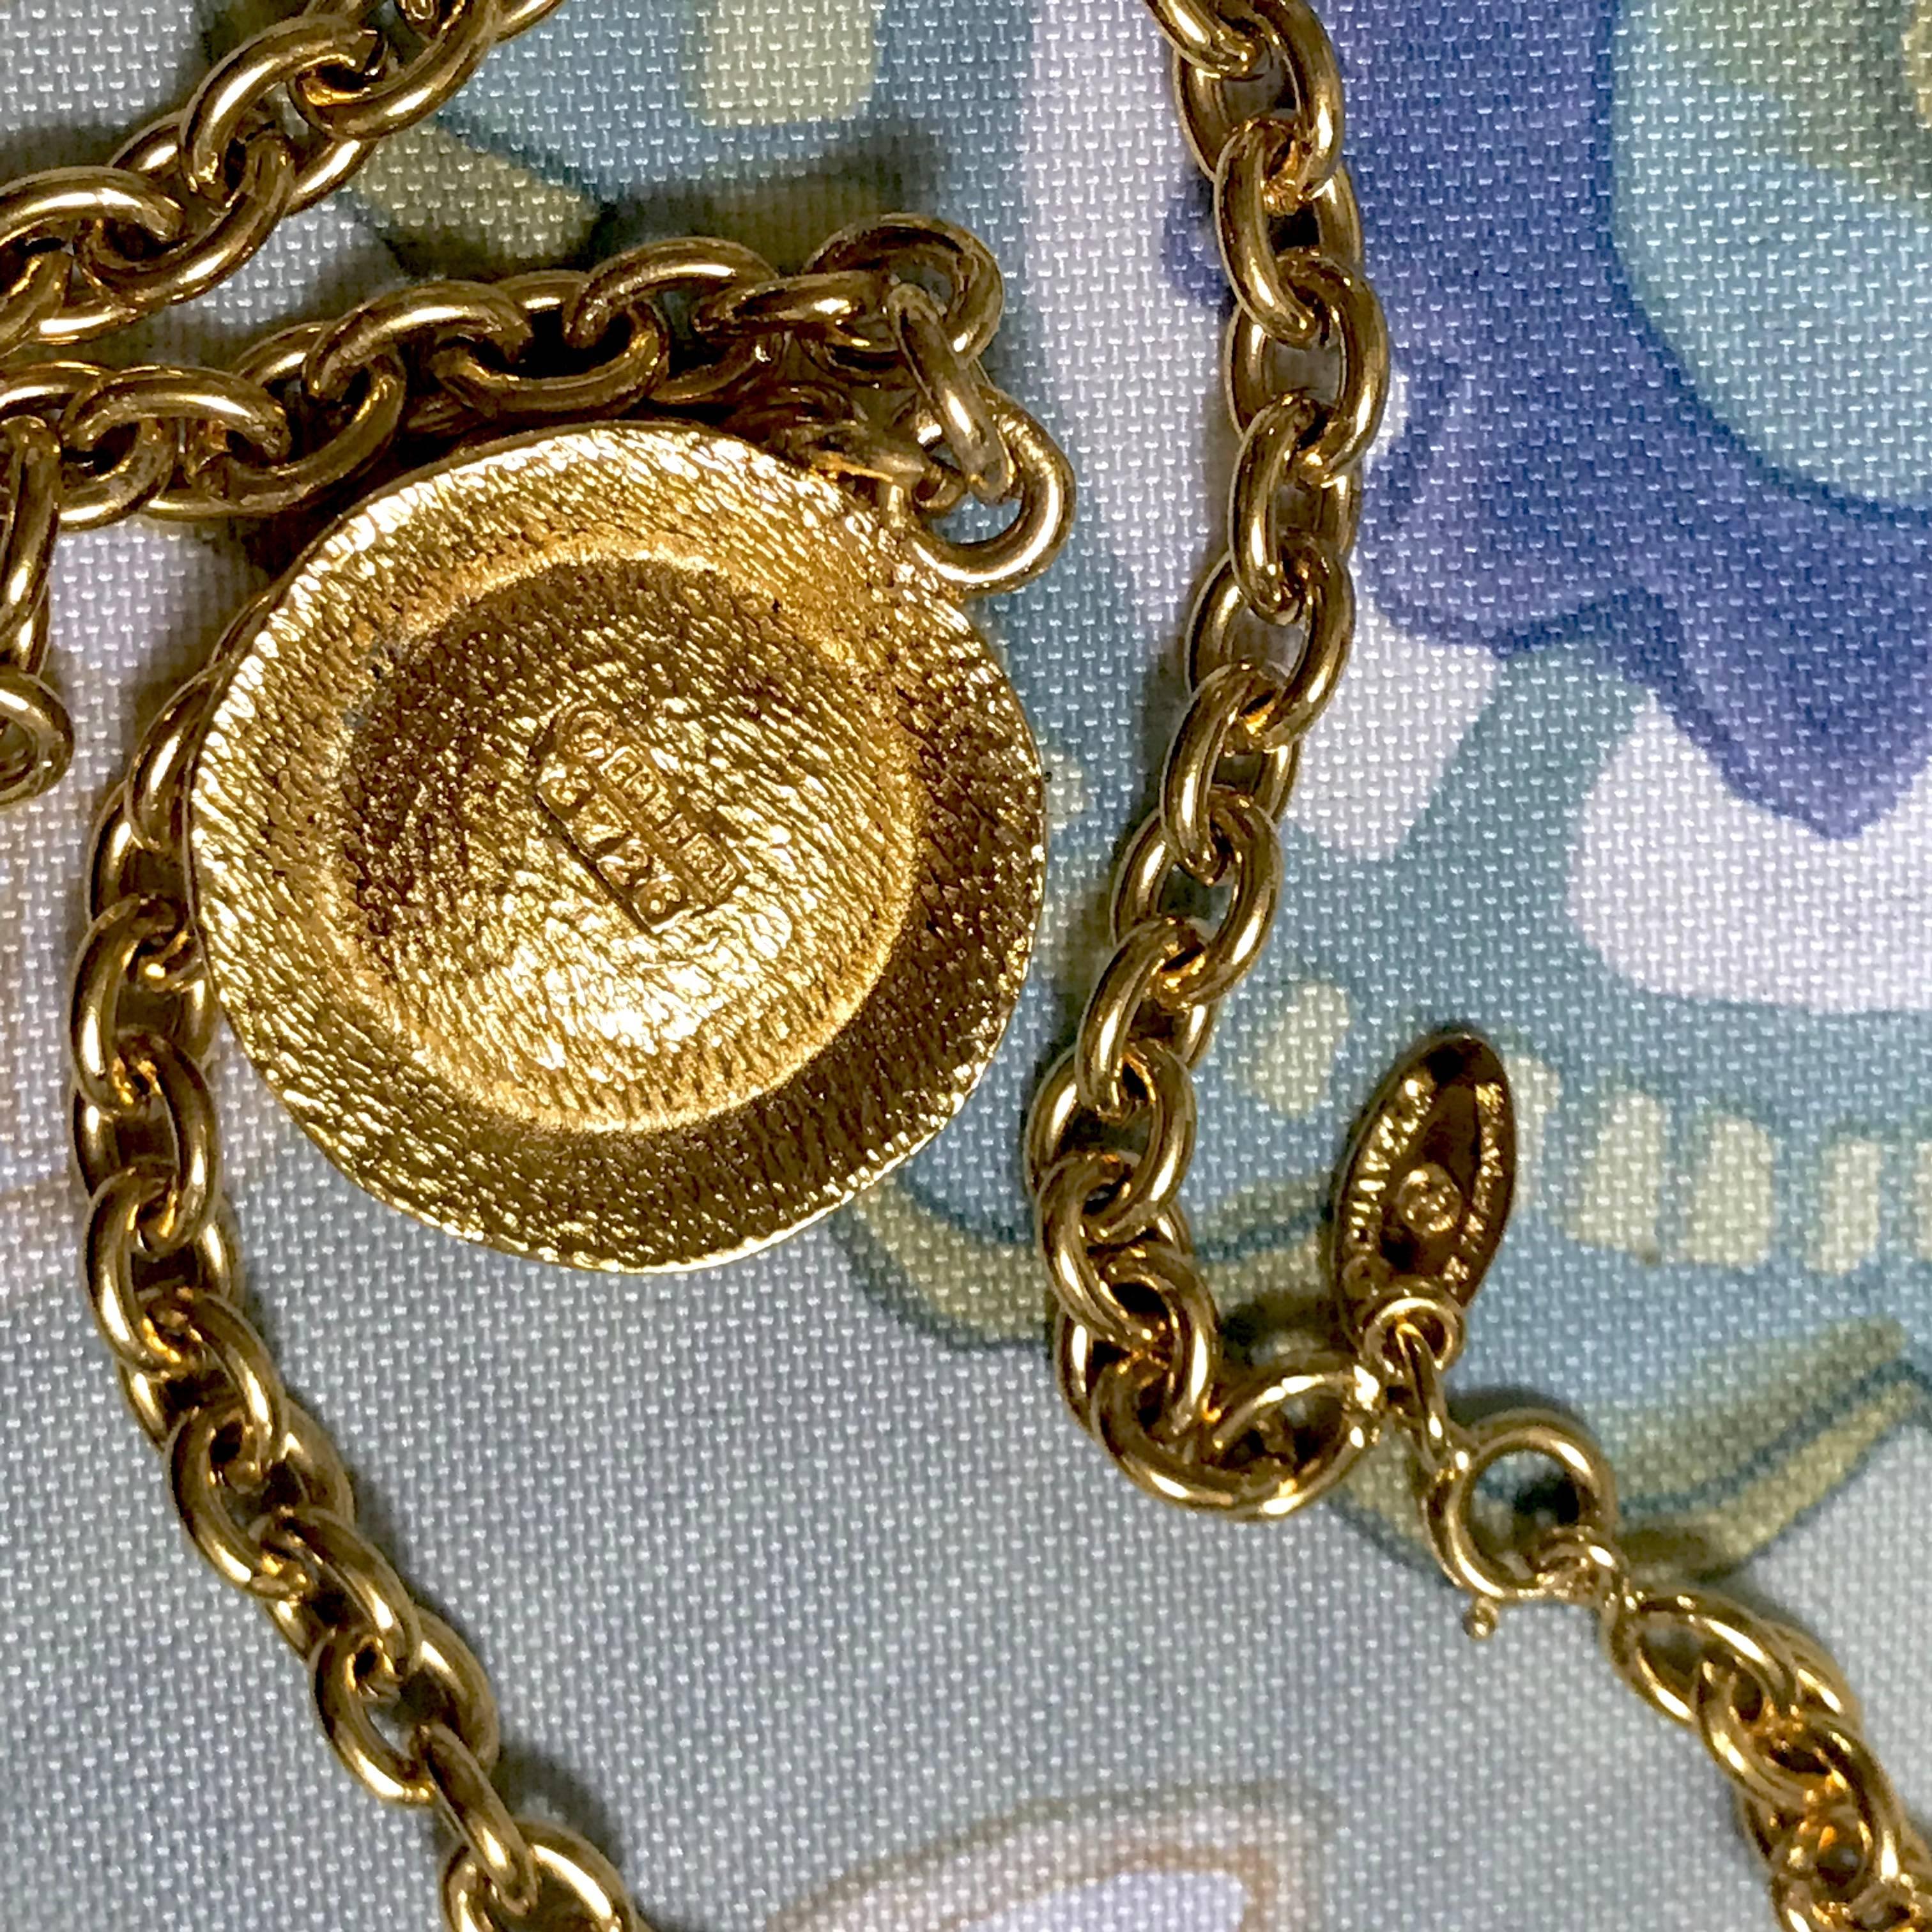 Women's Vintage CHANEL golden chain necklace with round faux pearl and logo pendant top. For Sale